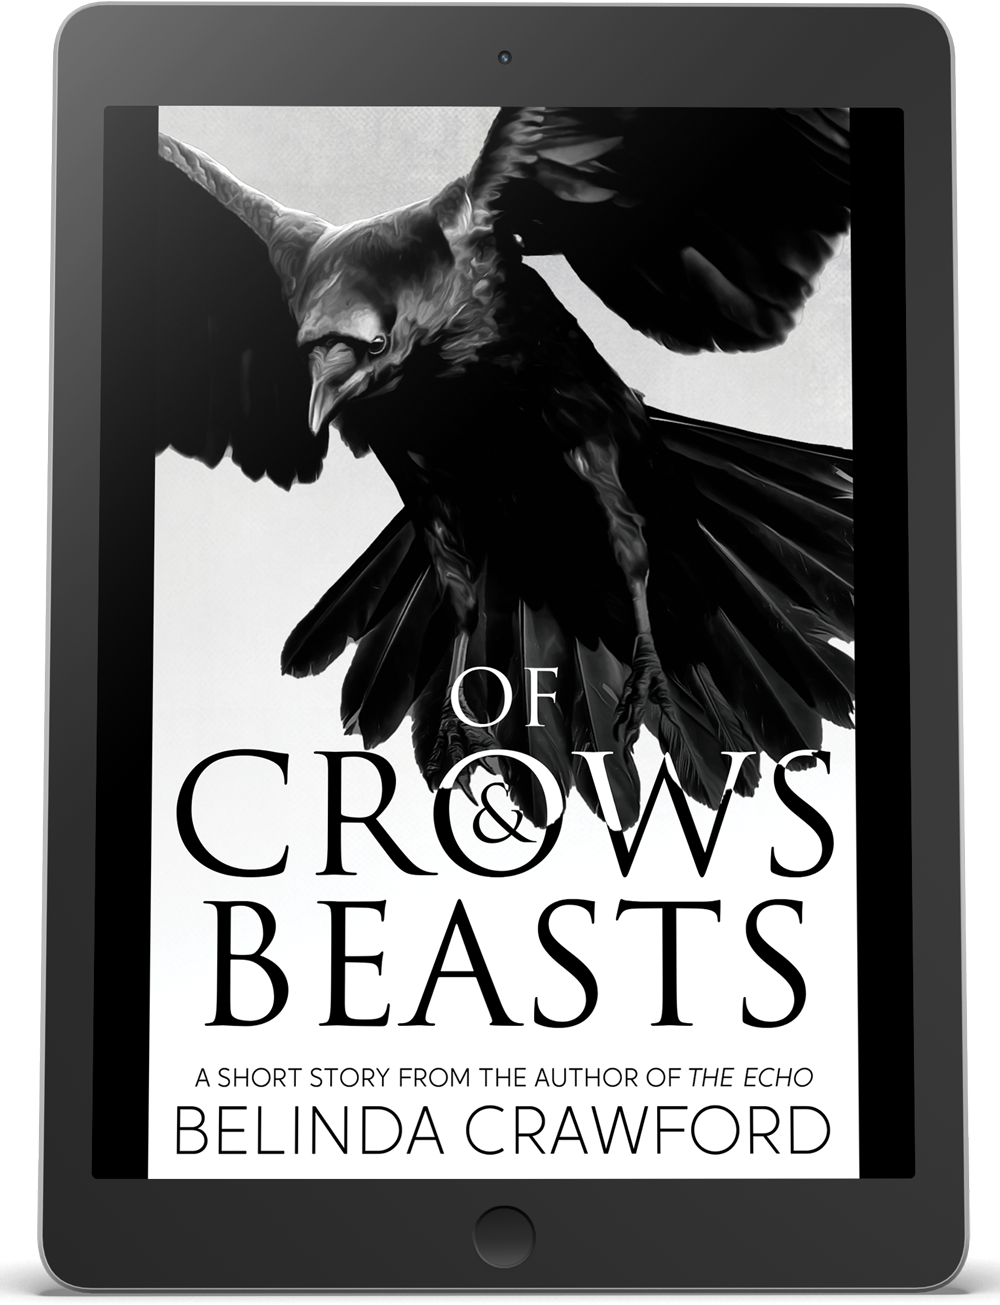 Of Crows & Beasts: An original short story of science and magic